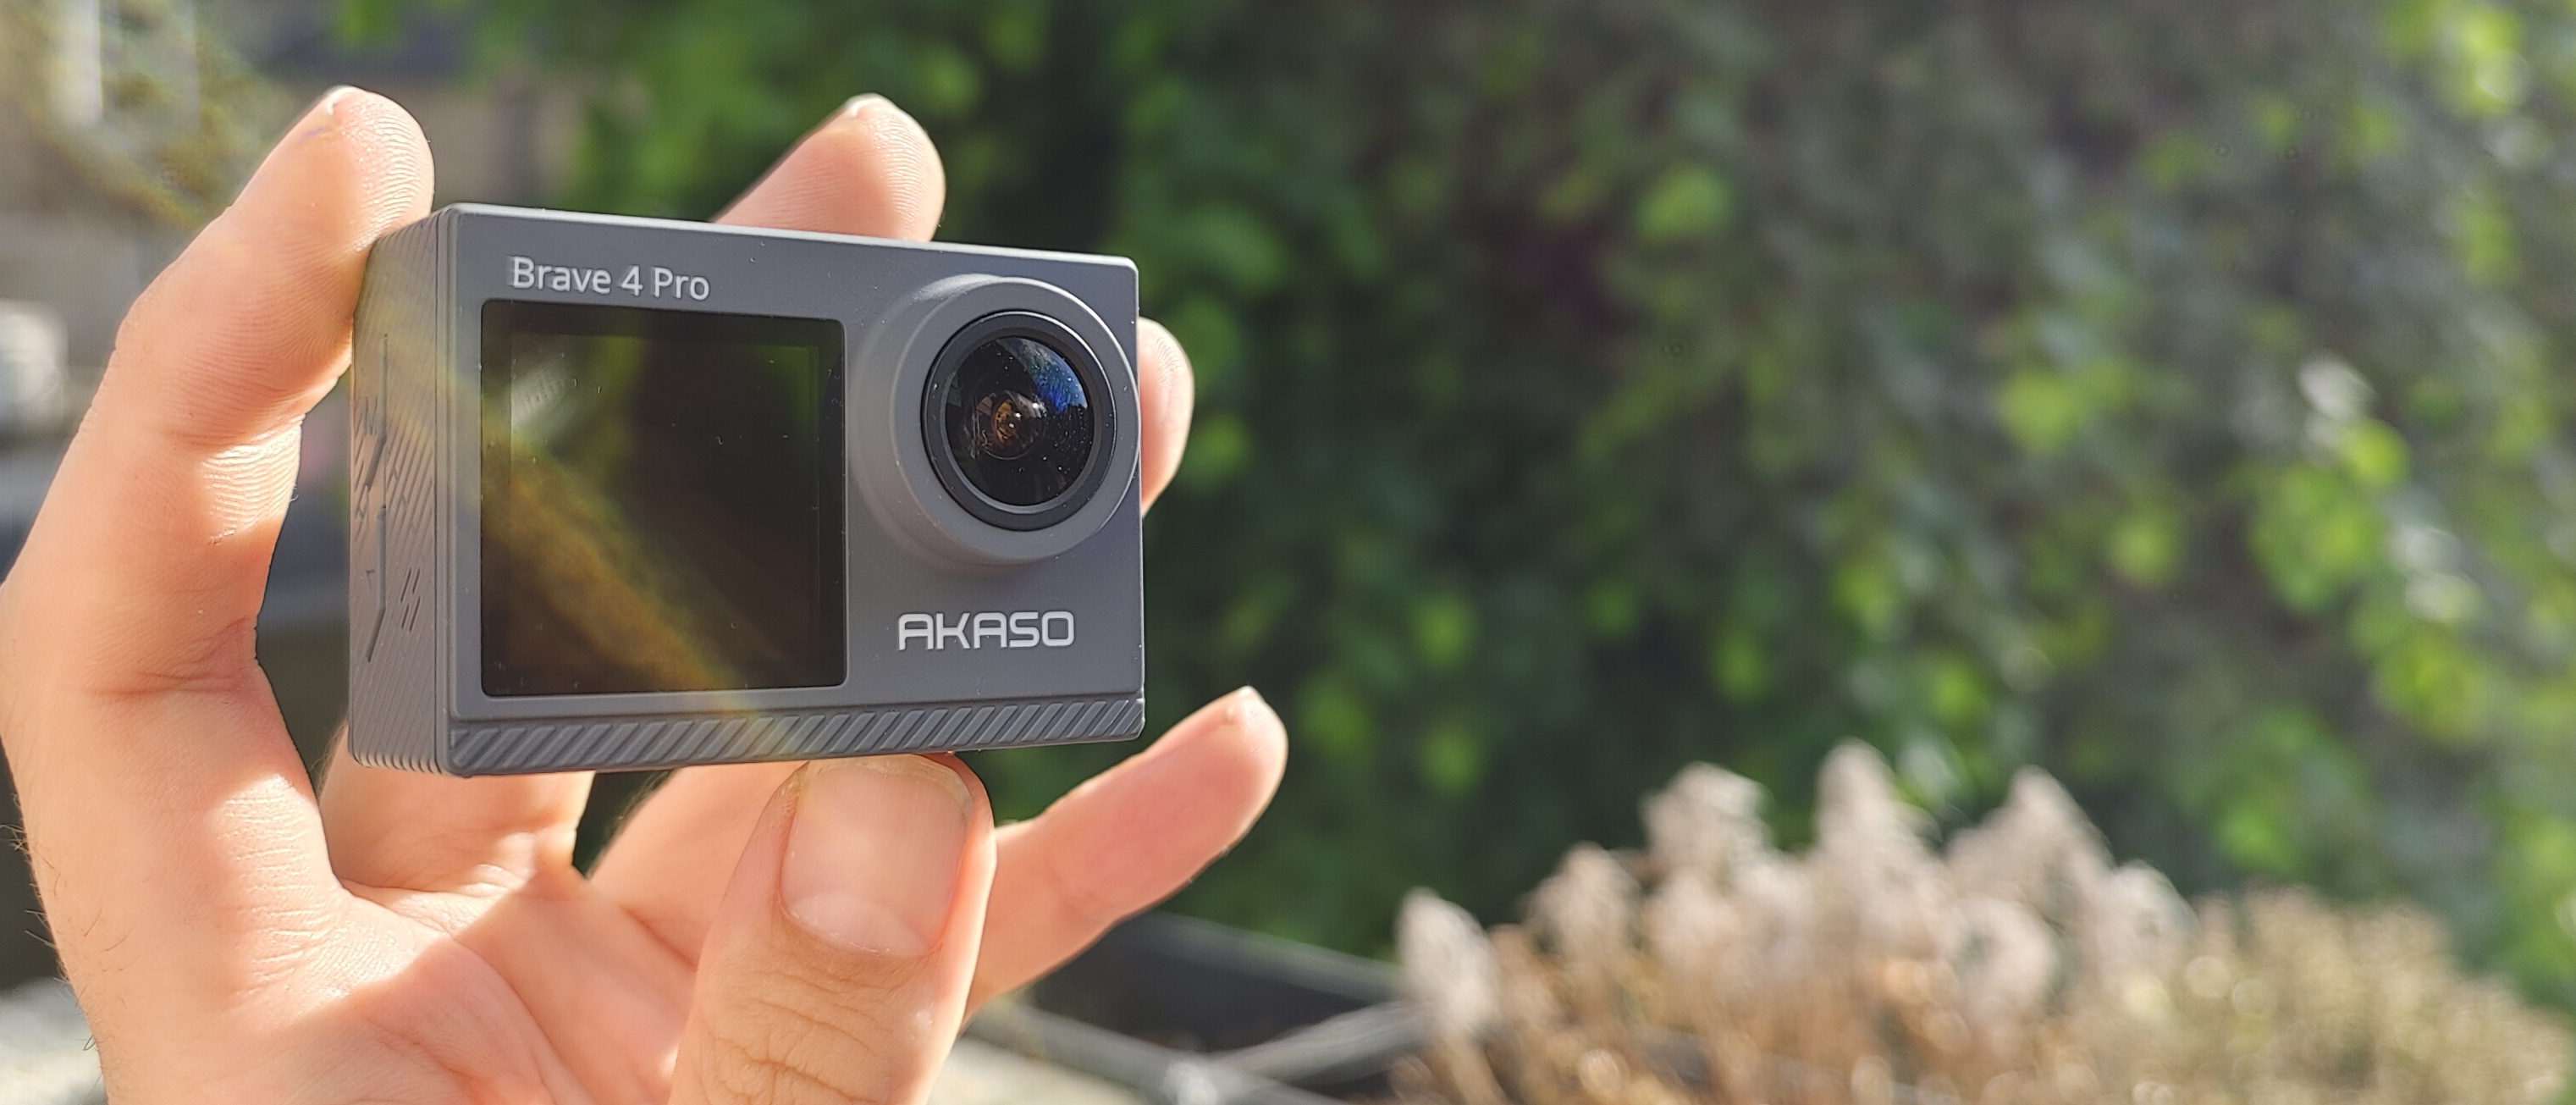 Akaso Brave 4 Elite Action Camera Review. Is it really Elite? 